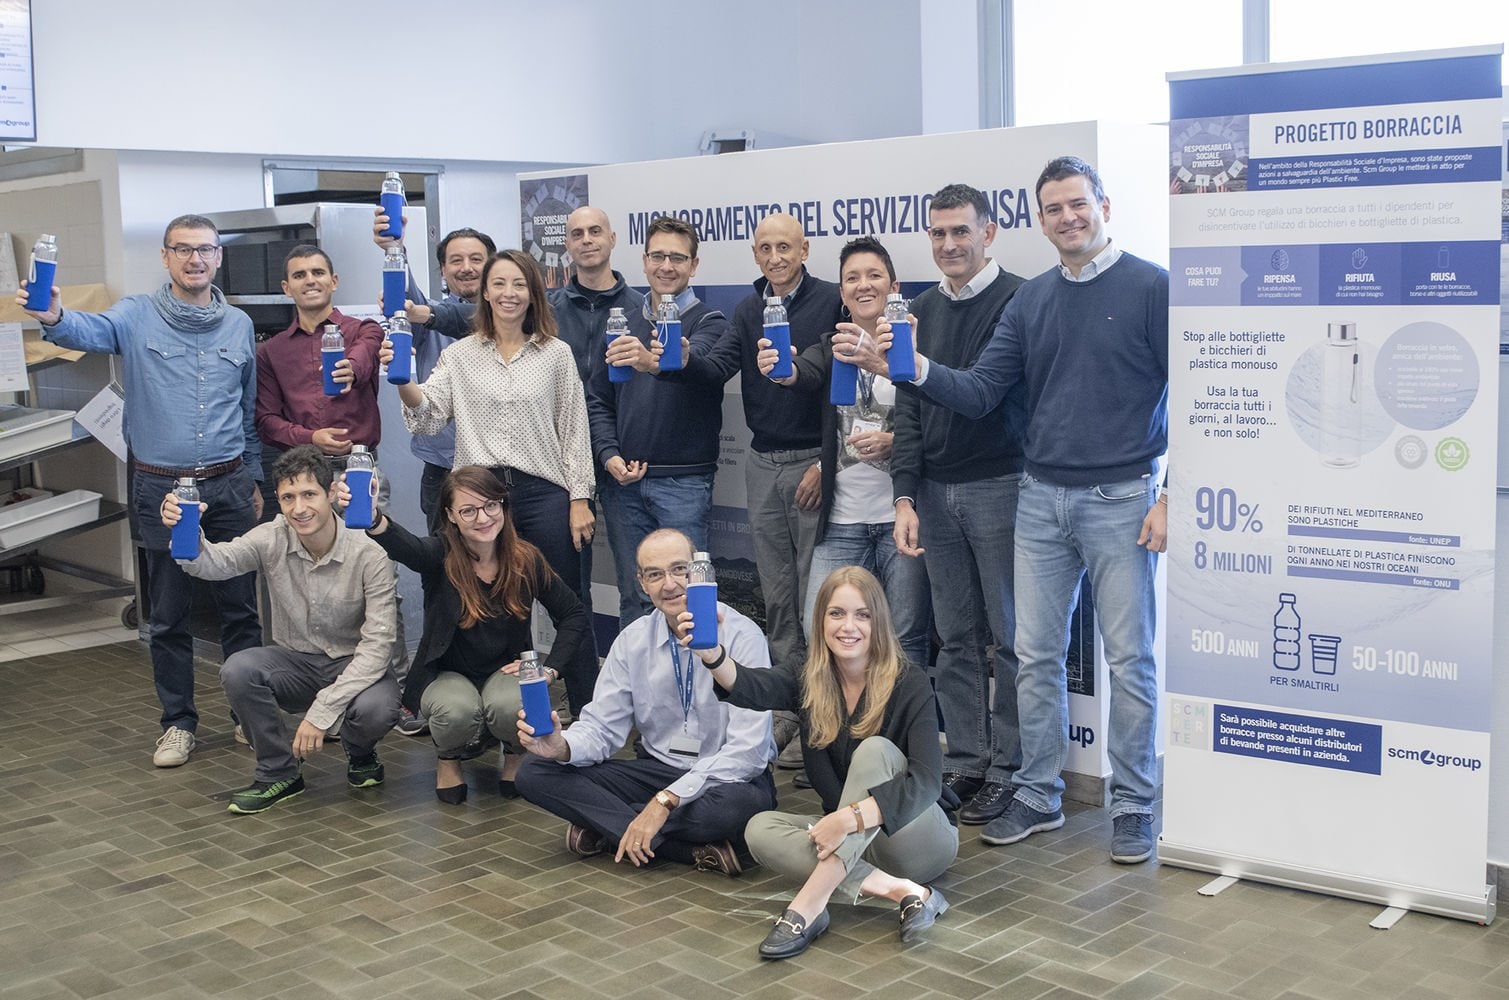 Corporate Social Responsibility Action for more than 3,000 employees throughout Italy